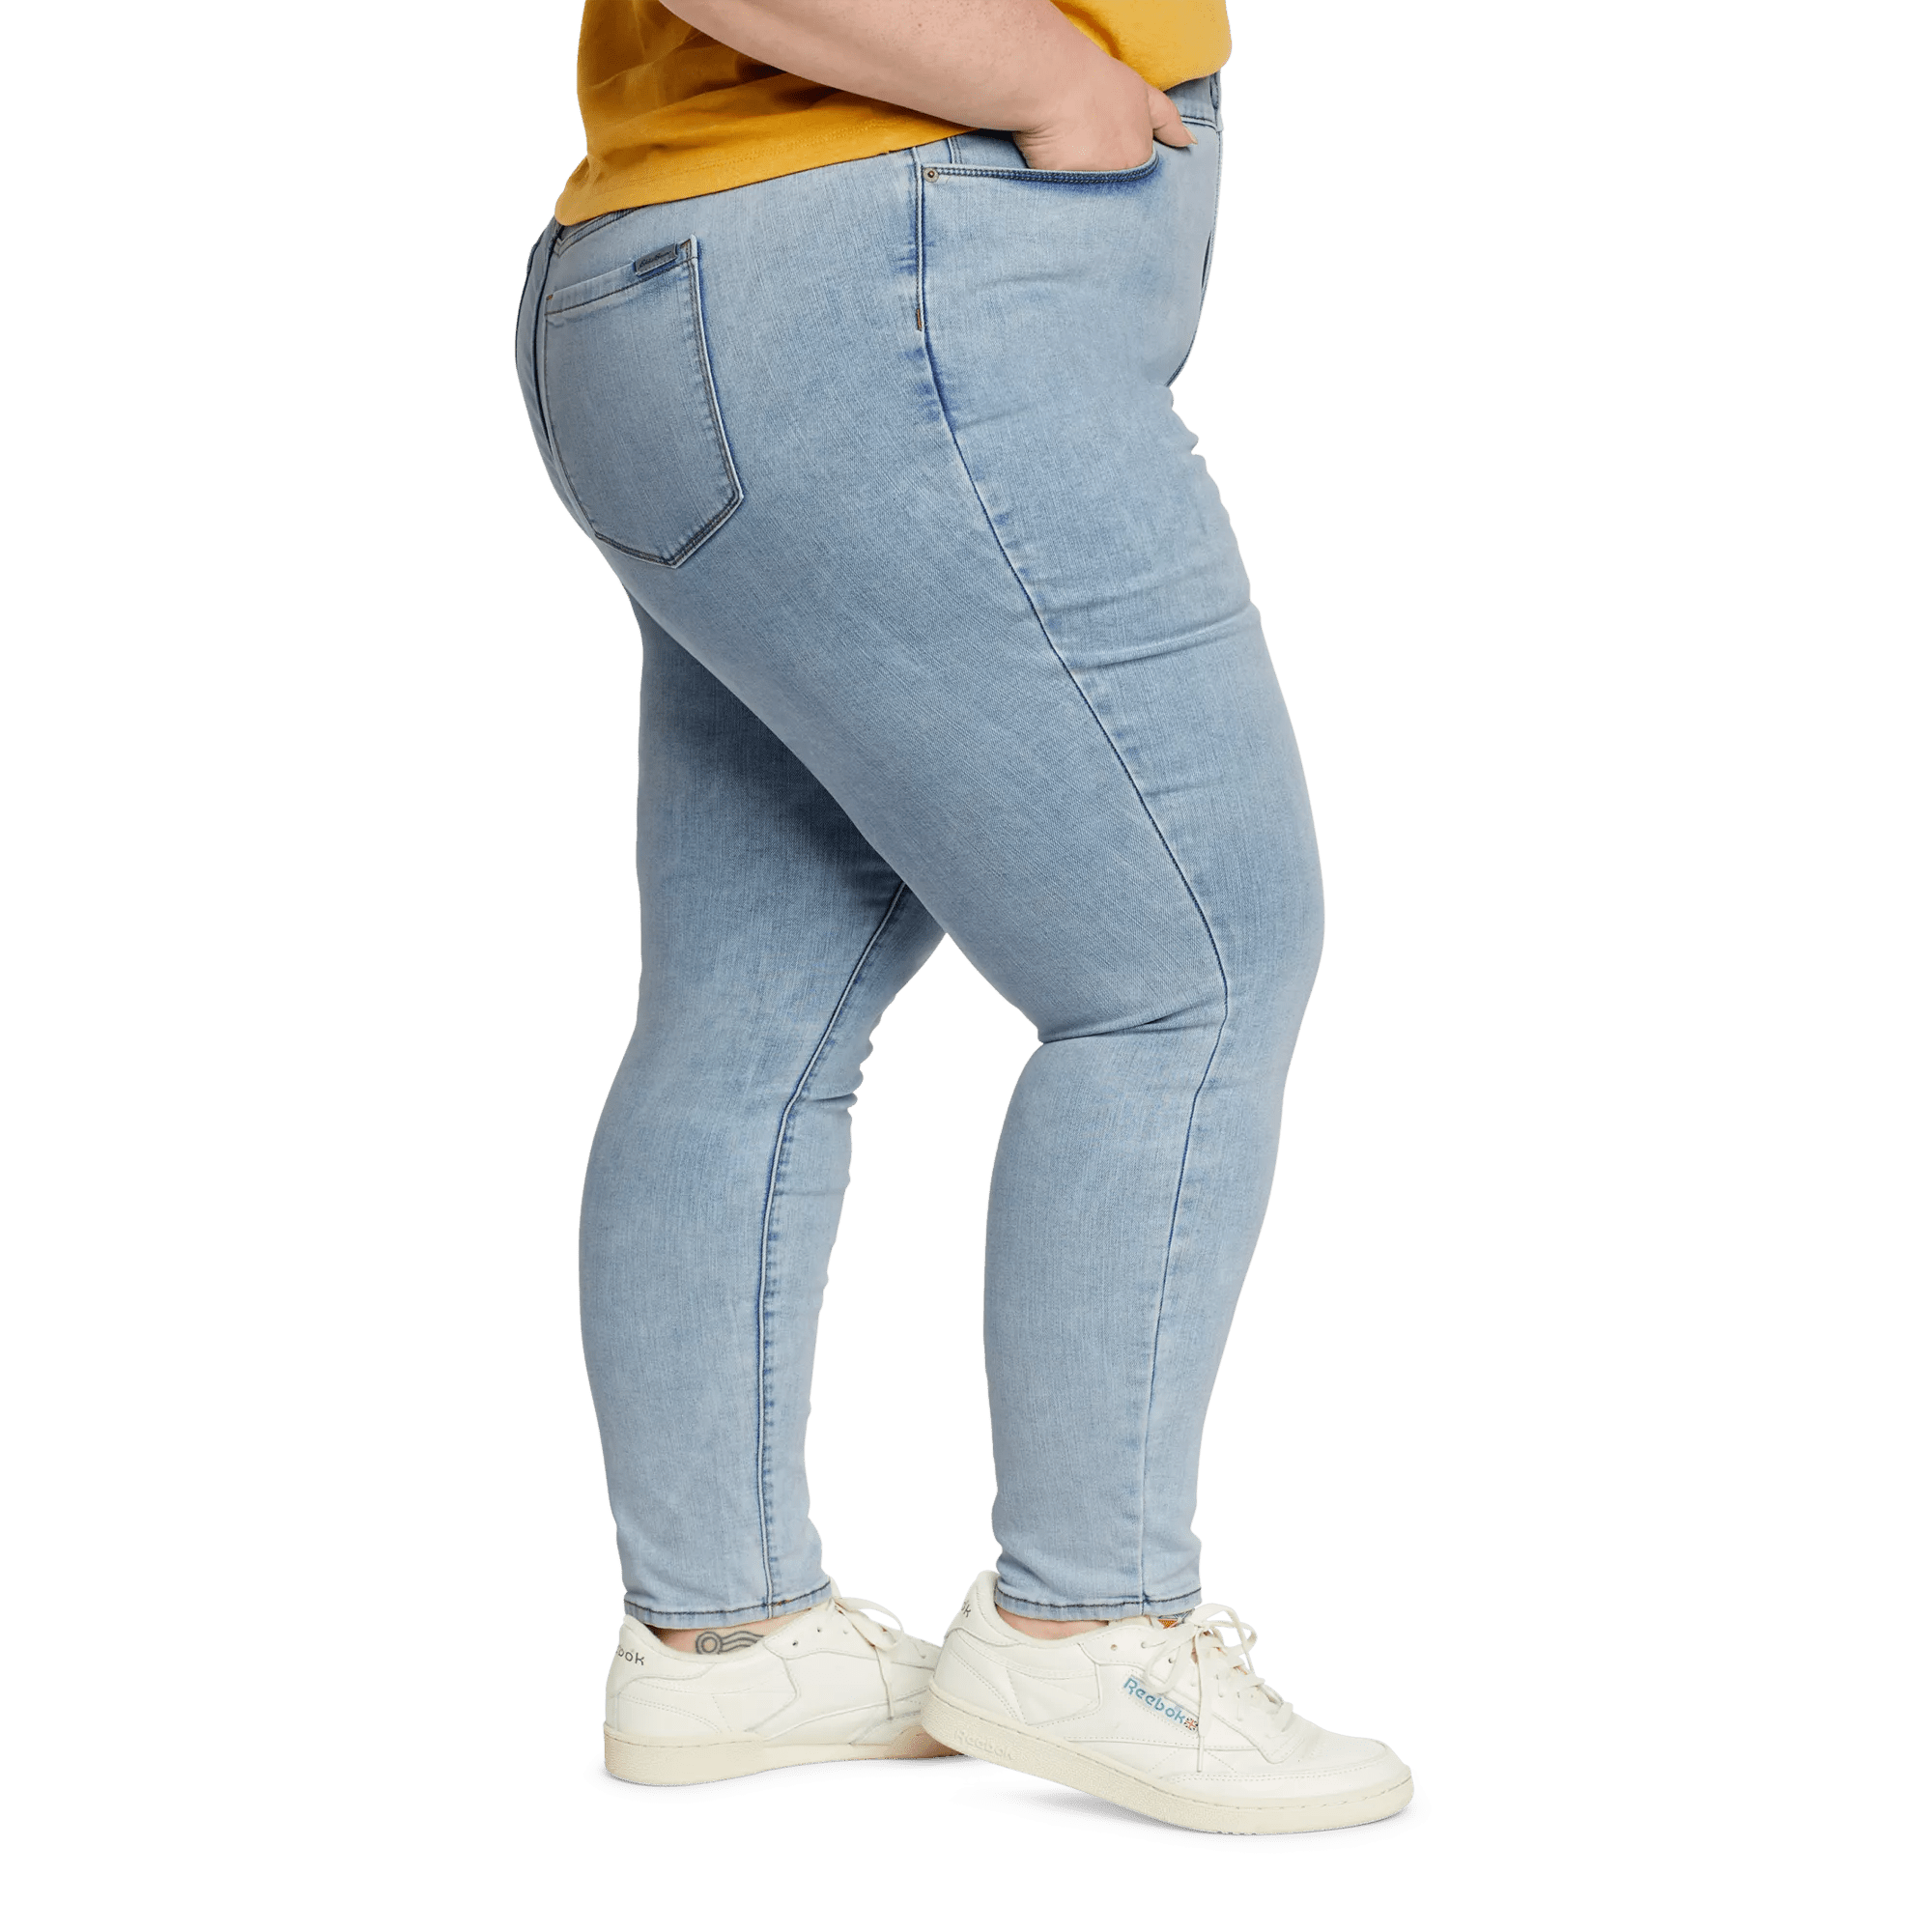 Voyager High-Rise Skinny Jeans - Slightly Curvy